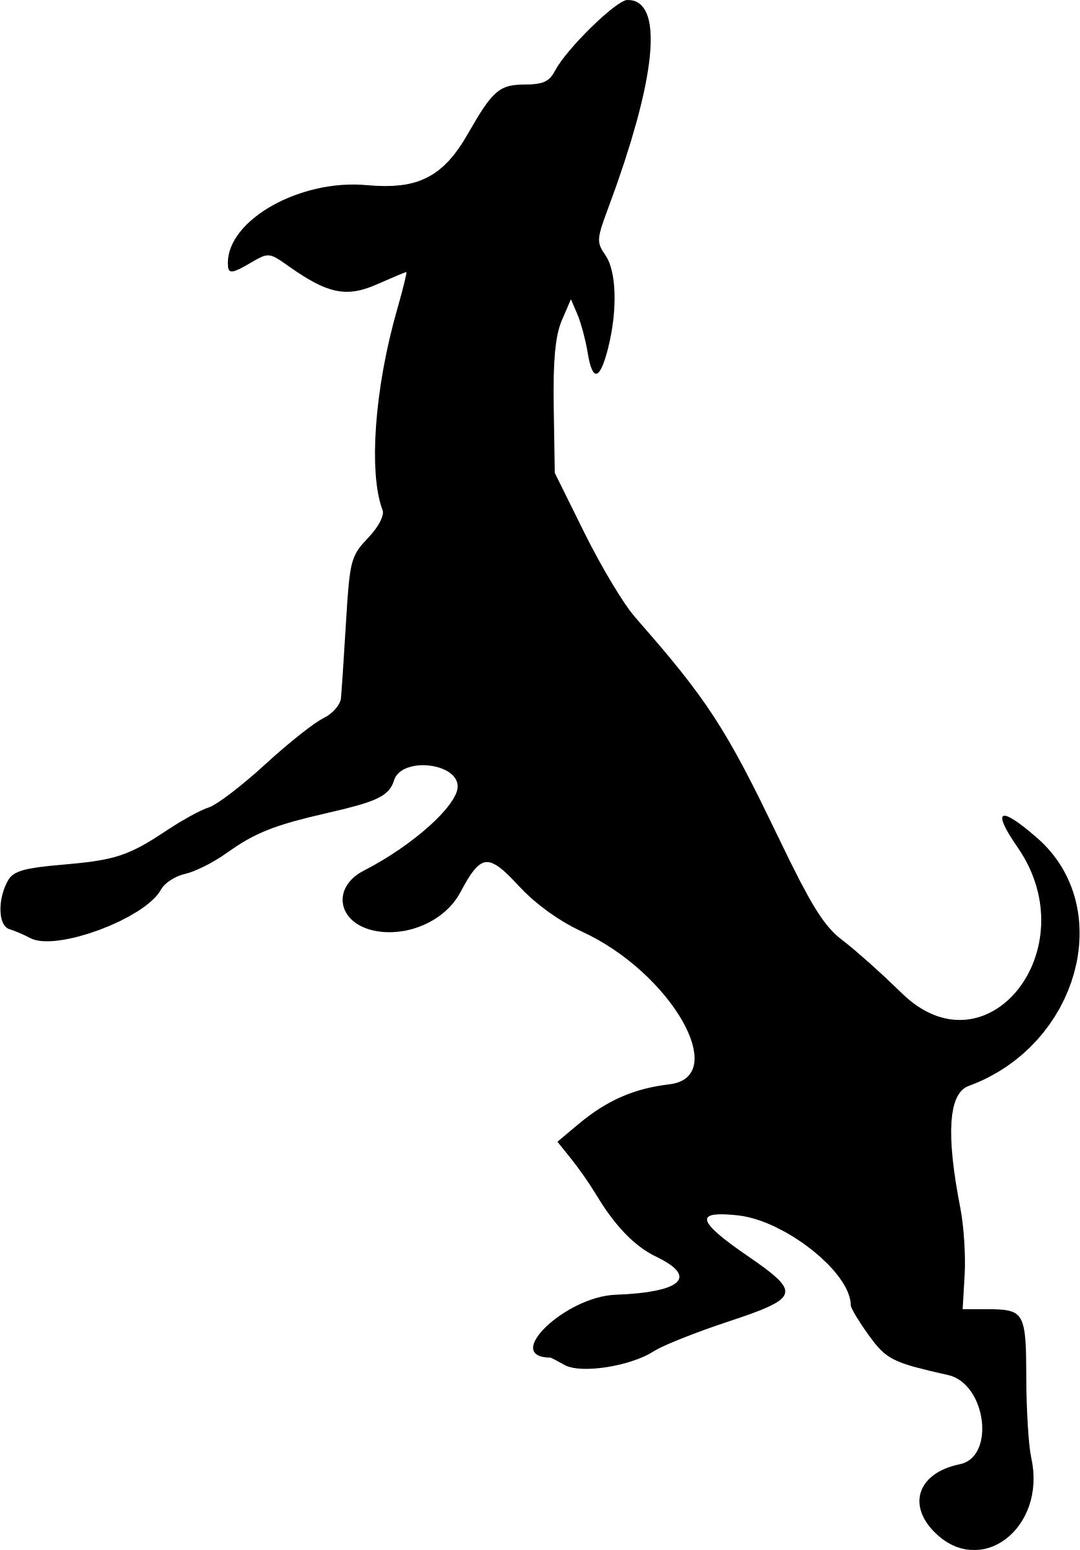 Dog silhouette 3 png transparent